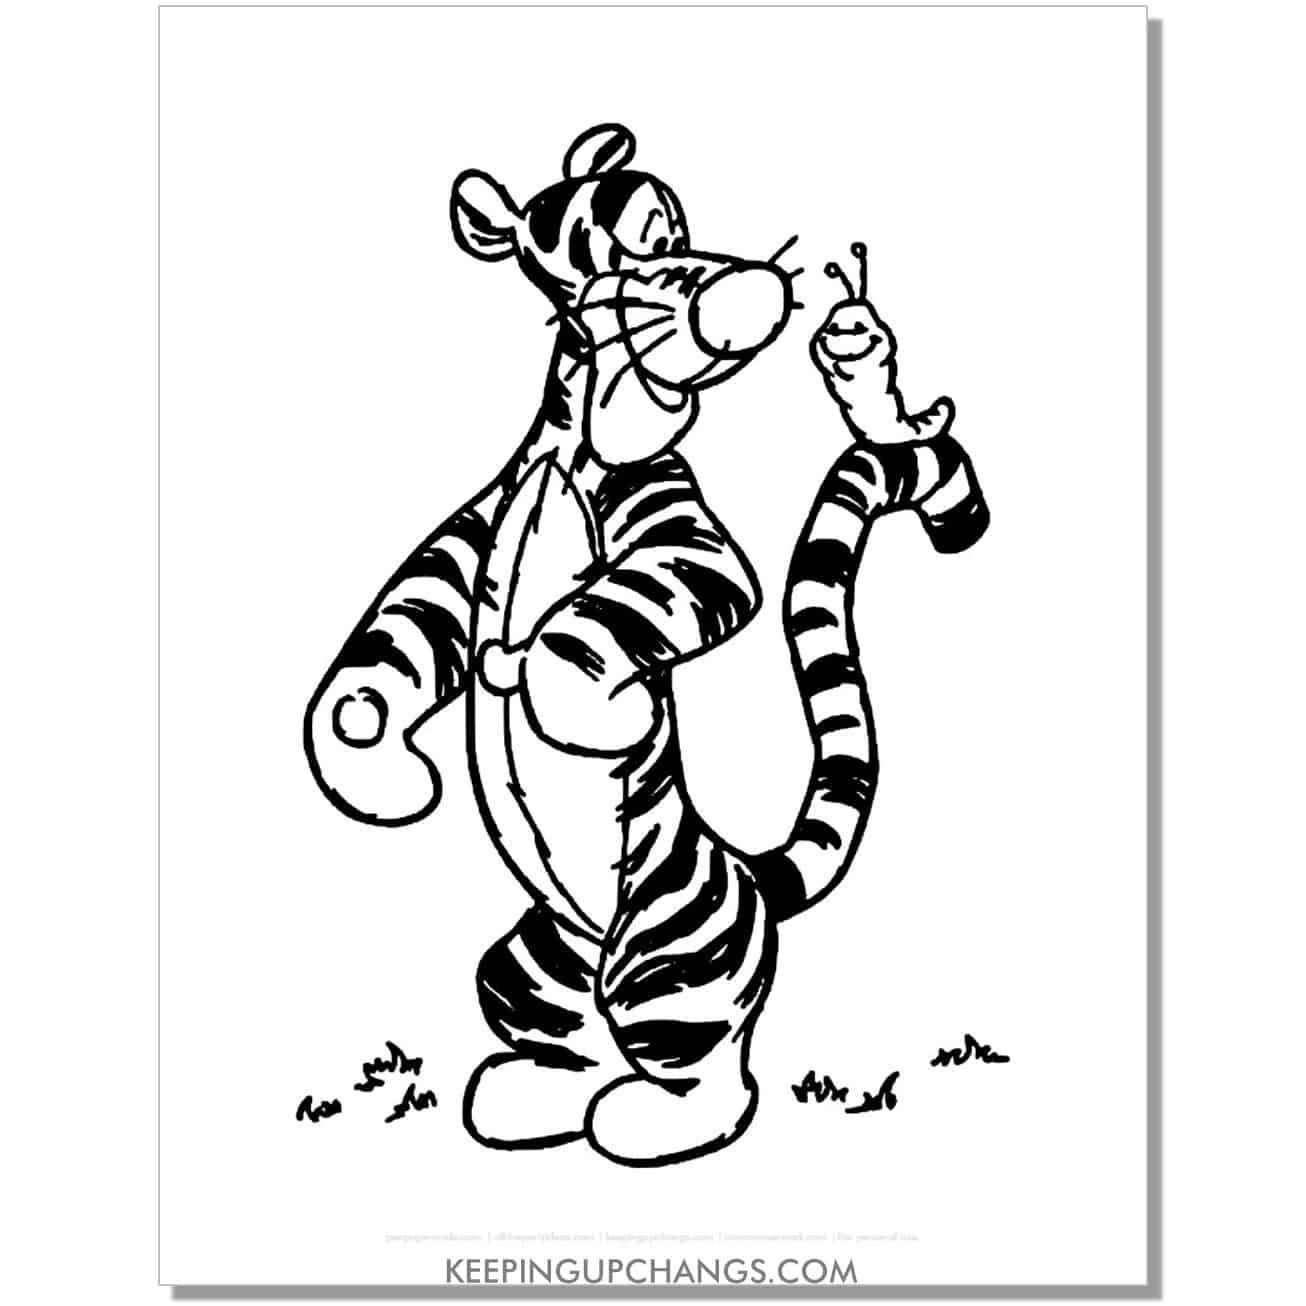 tigger with worm on tail coloring page, sheet.